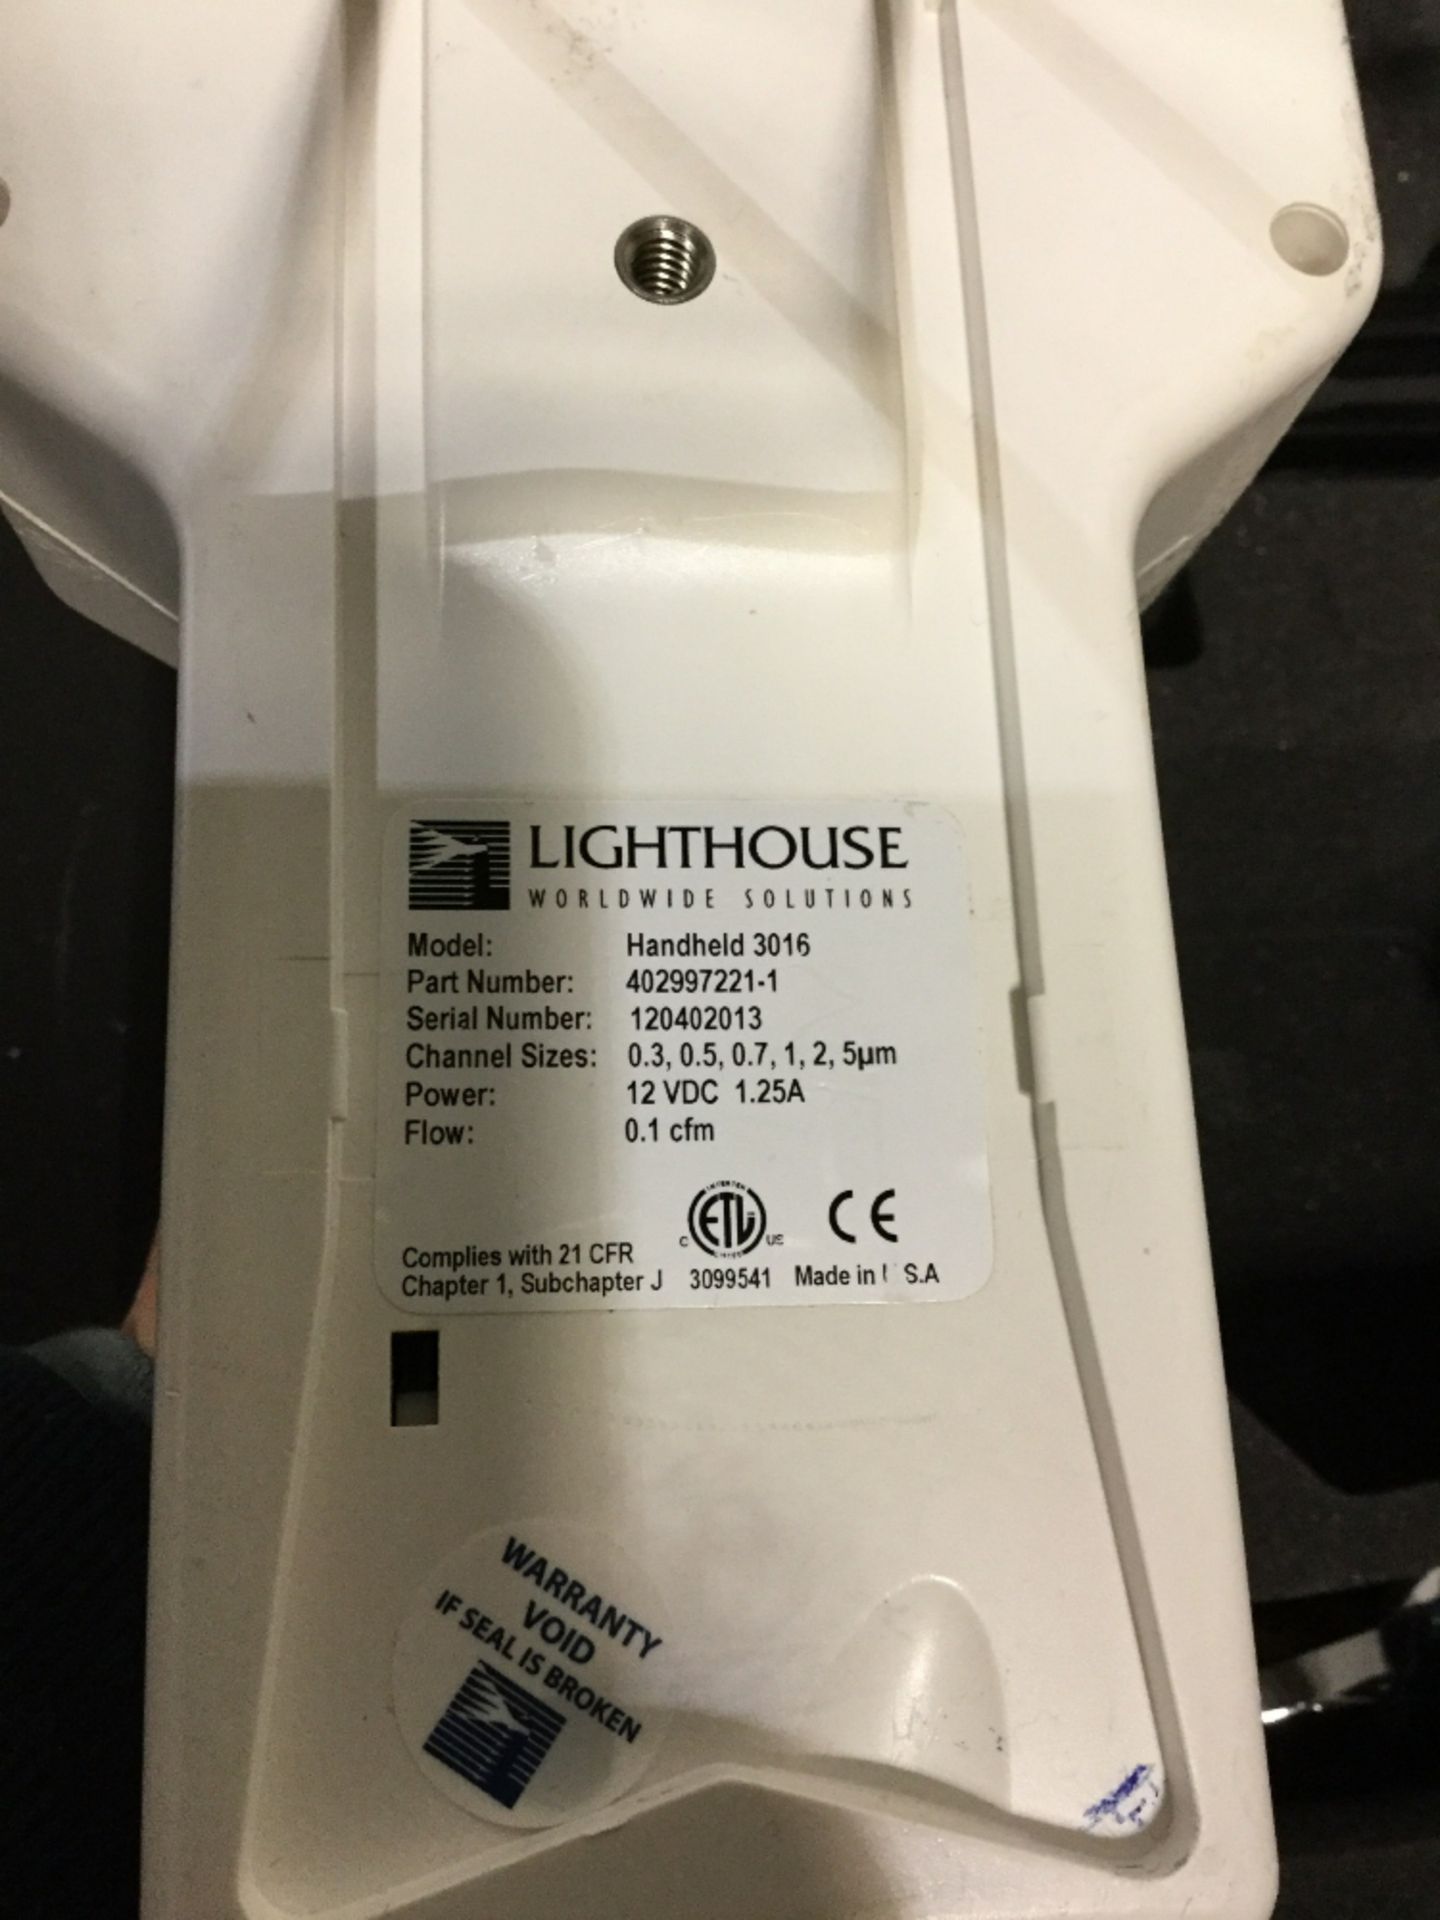 Lighthouse Worldwide Solutions Handheld Particle Counter - Image 2 of 3